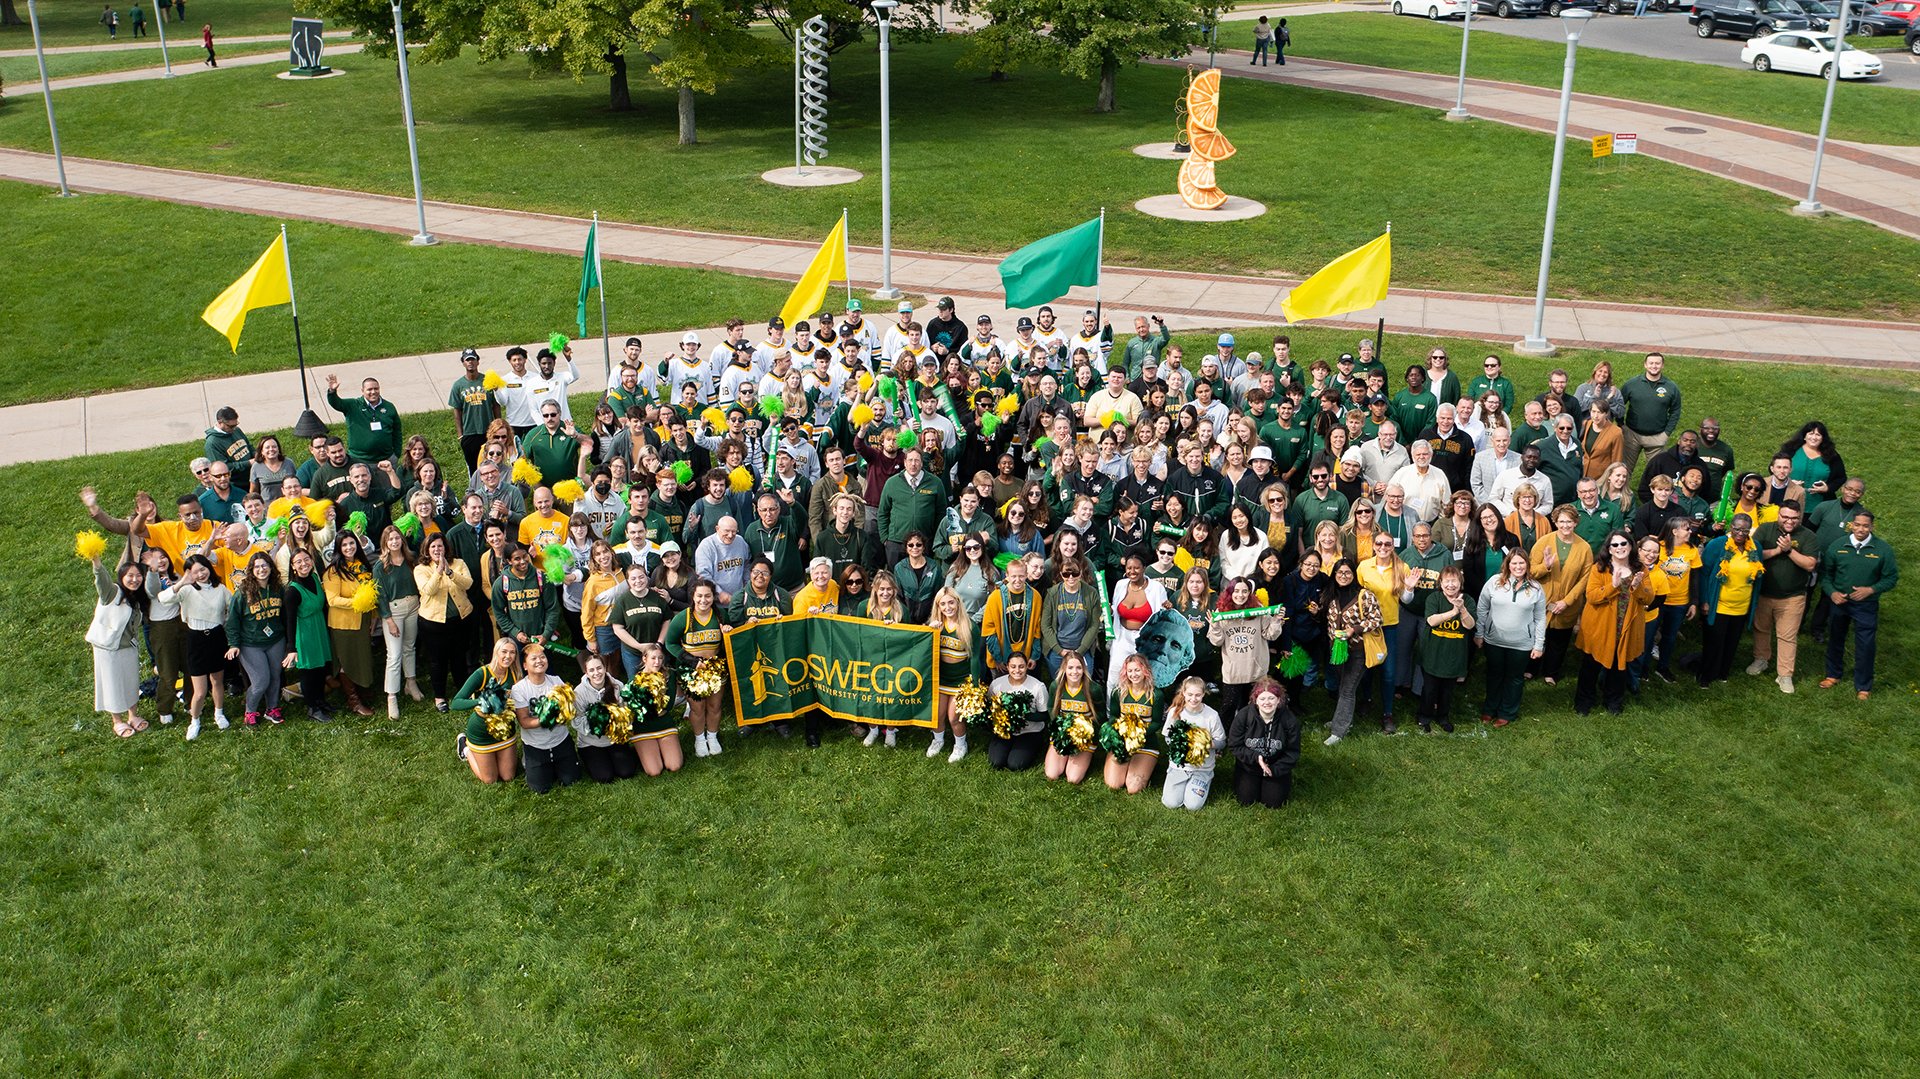 Students, alumni, faculty and staff showed their Oswego spirit by proudly showing Oswego's college colors in the official Green and Gold campus photo Sept. 30. The annual event is held in conjunction with Founder's Weekend.